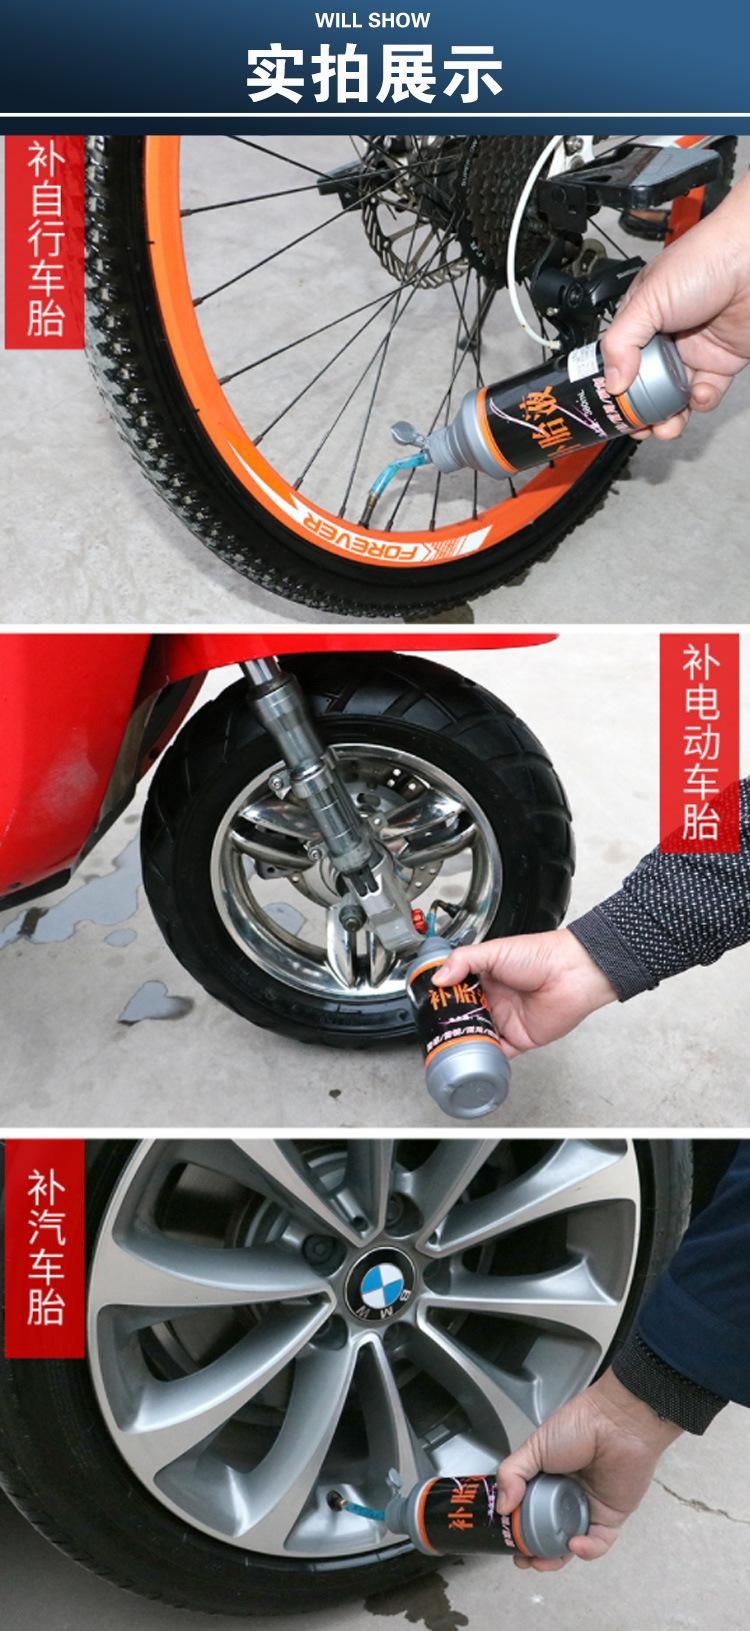 Private Label Tubeless Sealant Chinese Reliable Supplier 450ml Anti Rust Tire Tubeless Tyre Puncture Repair Sealant